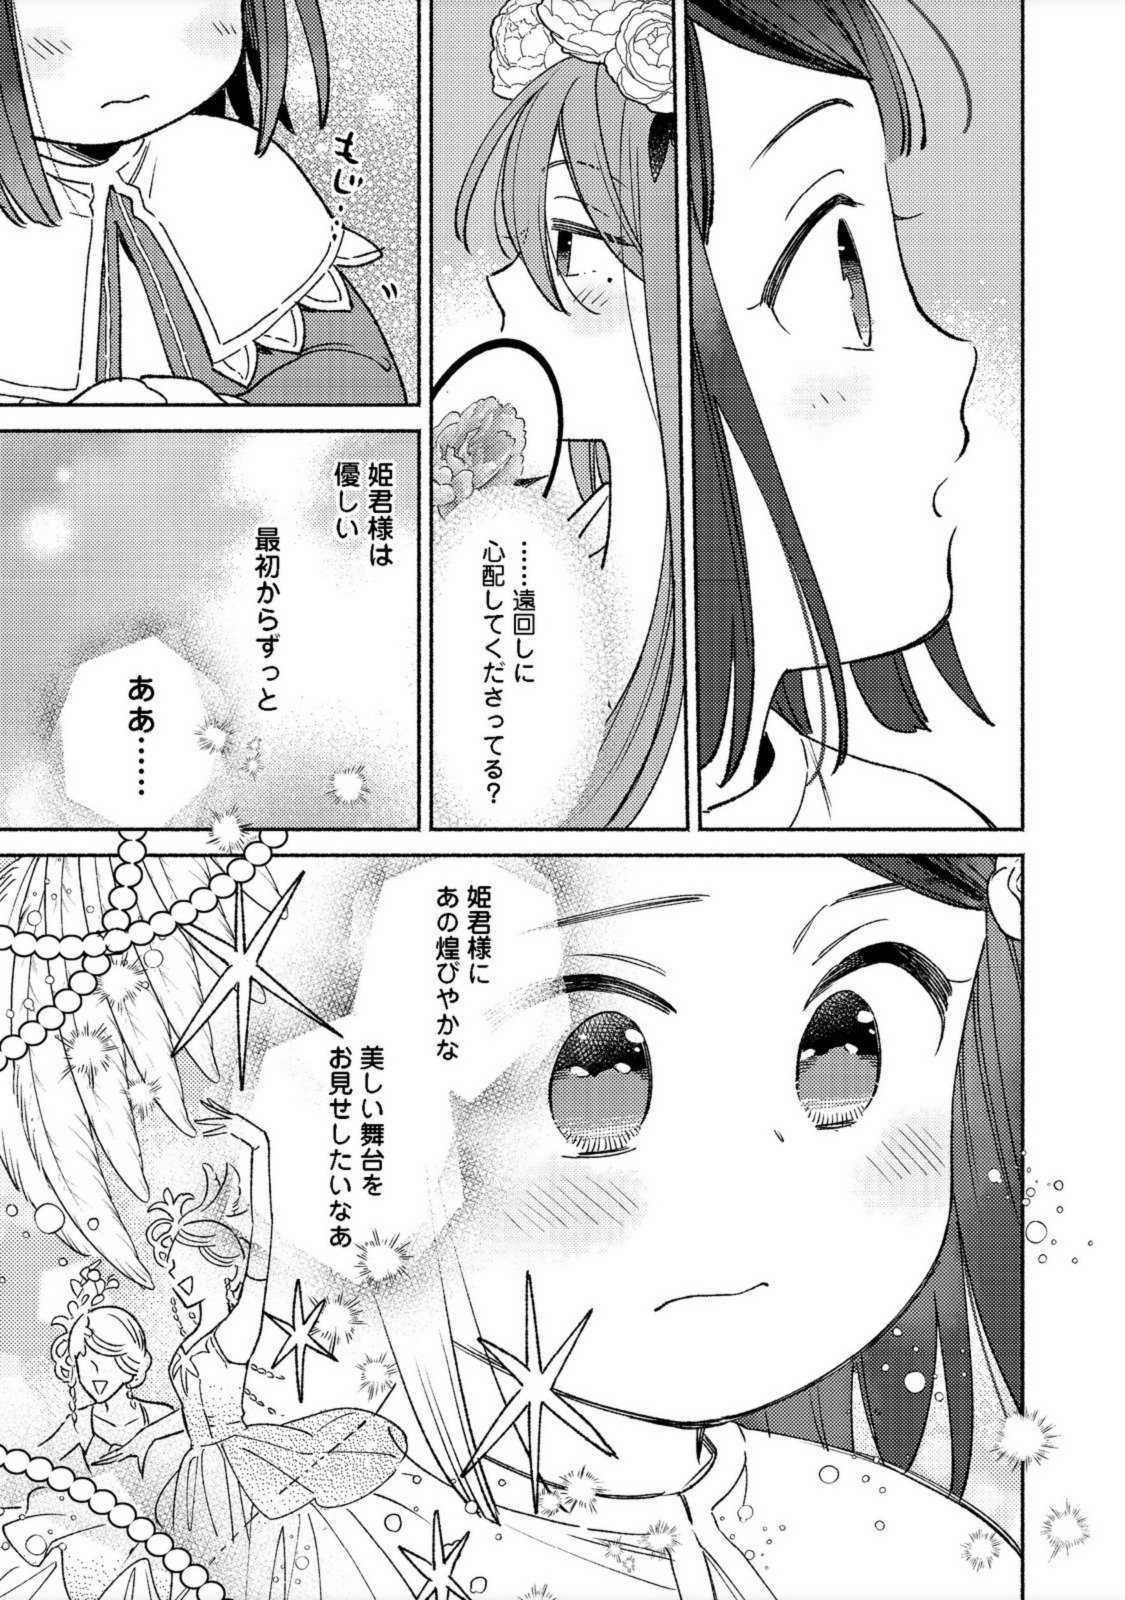 I’m the White Pig Nobleman 第14.1話 - Page 9